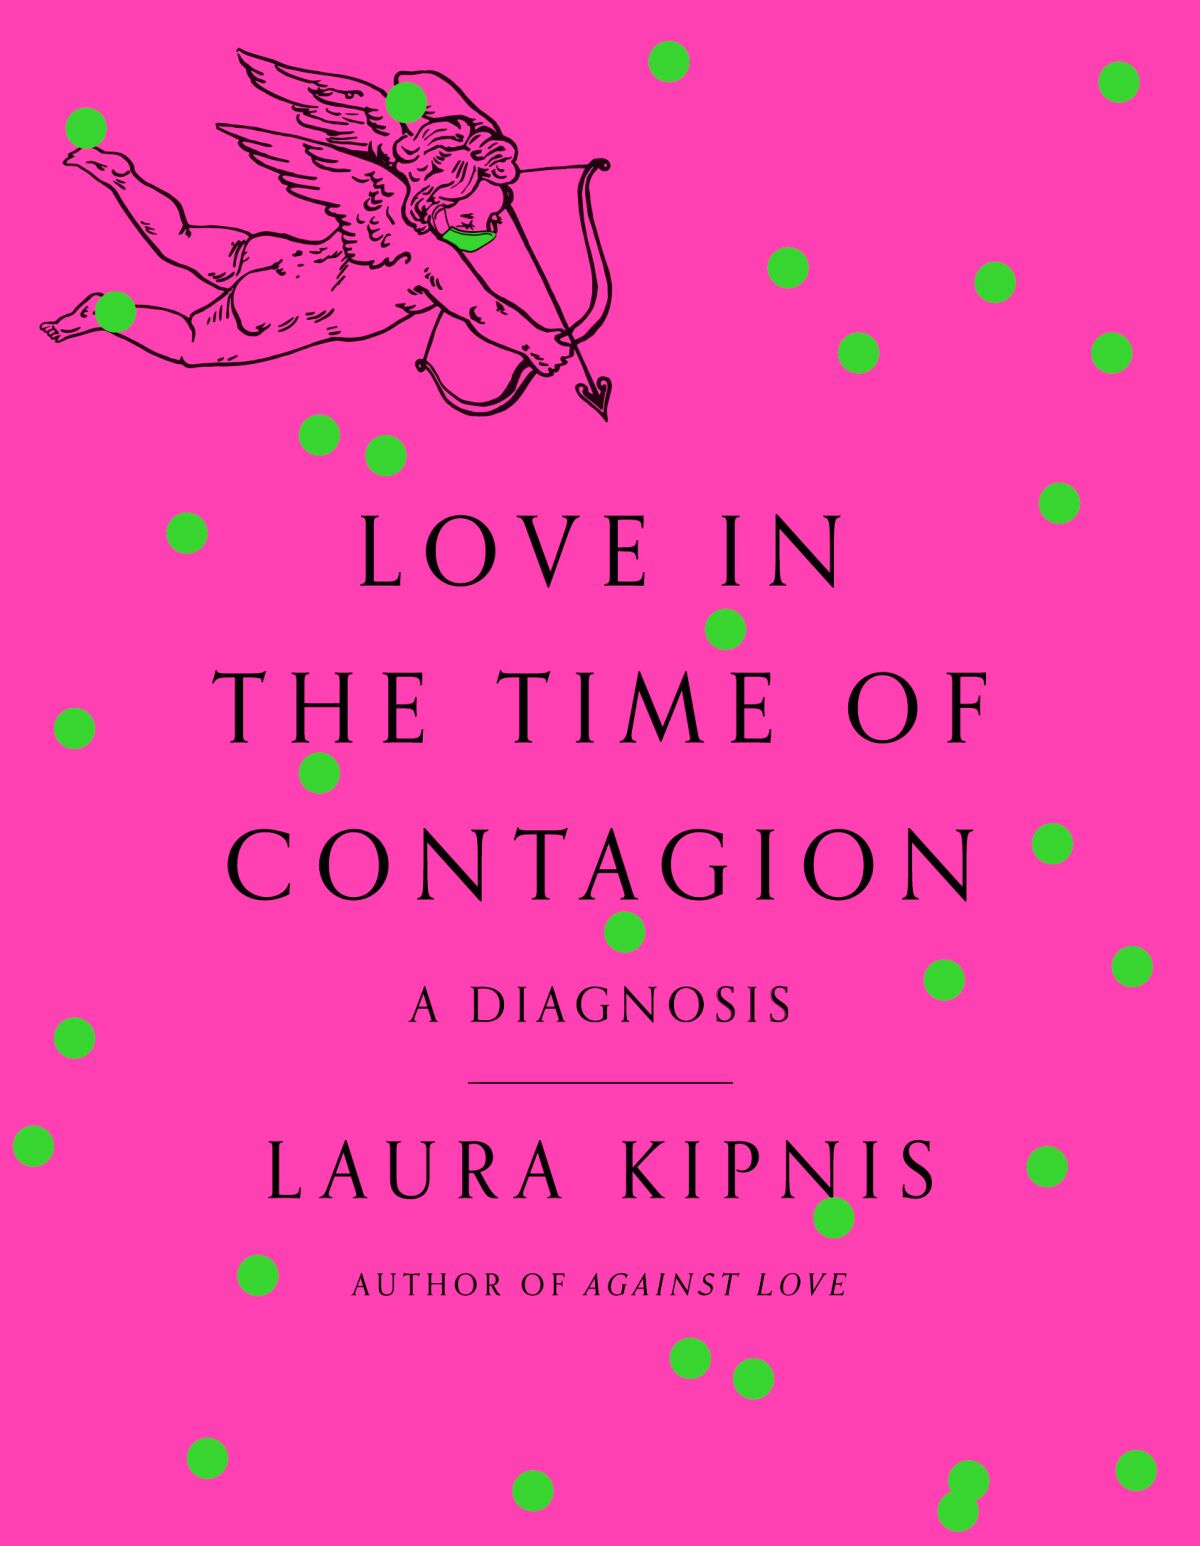 "Love in the Time of Contagion," by Laura Kipnis